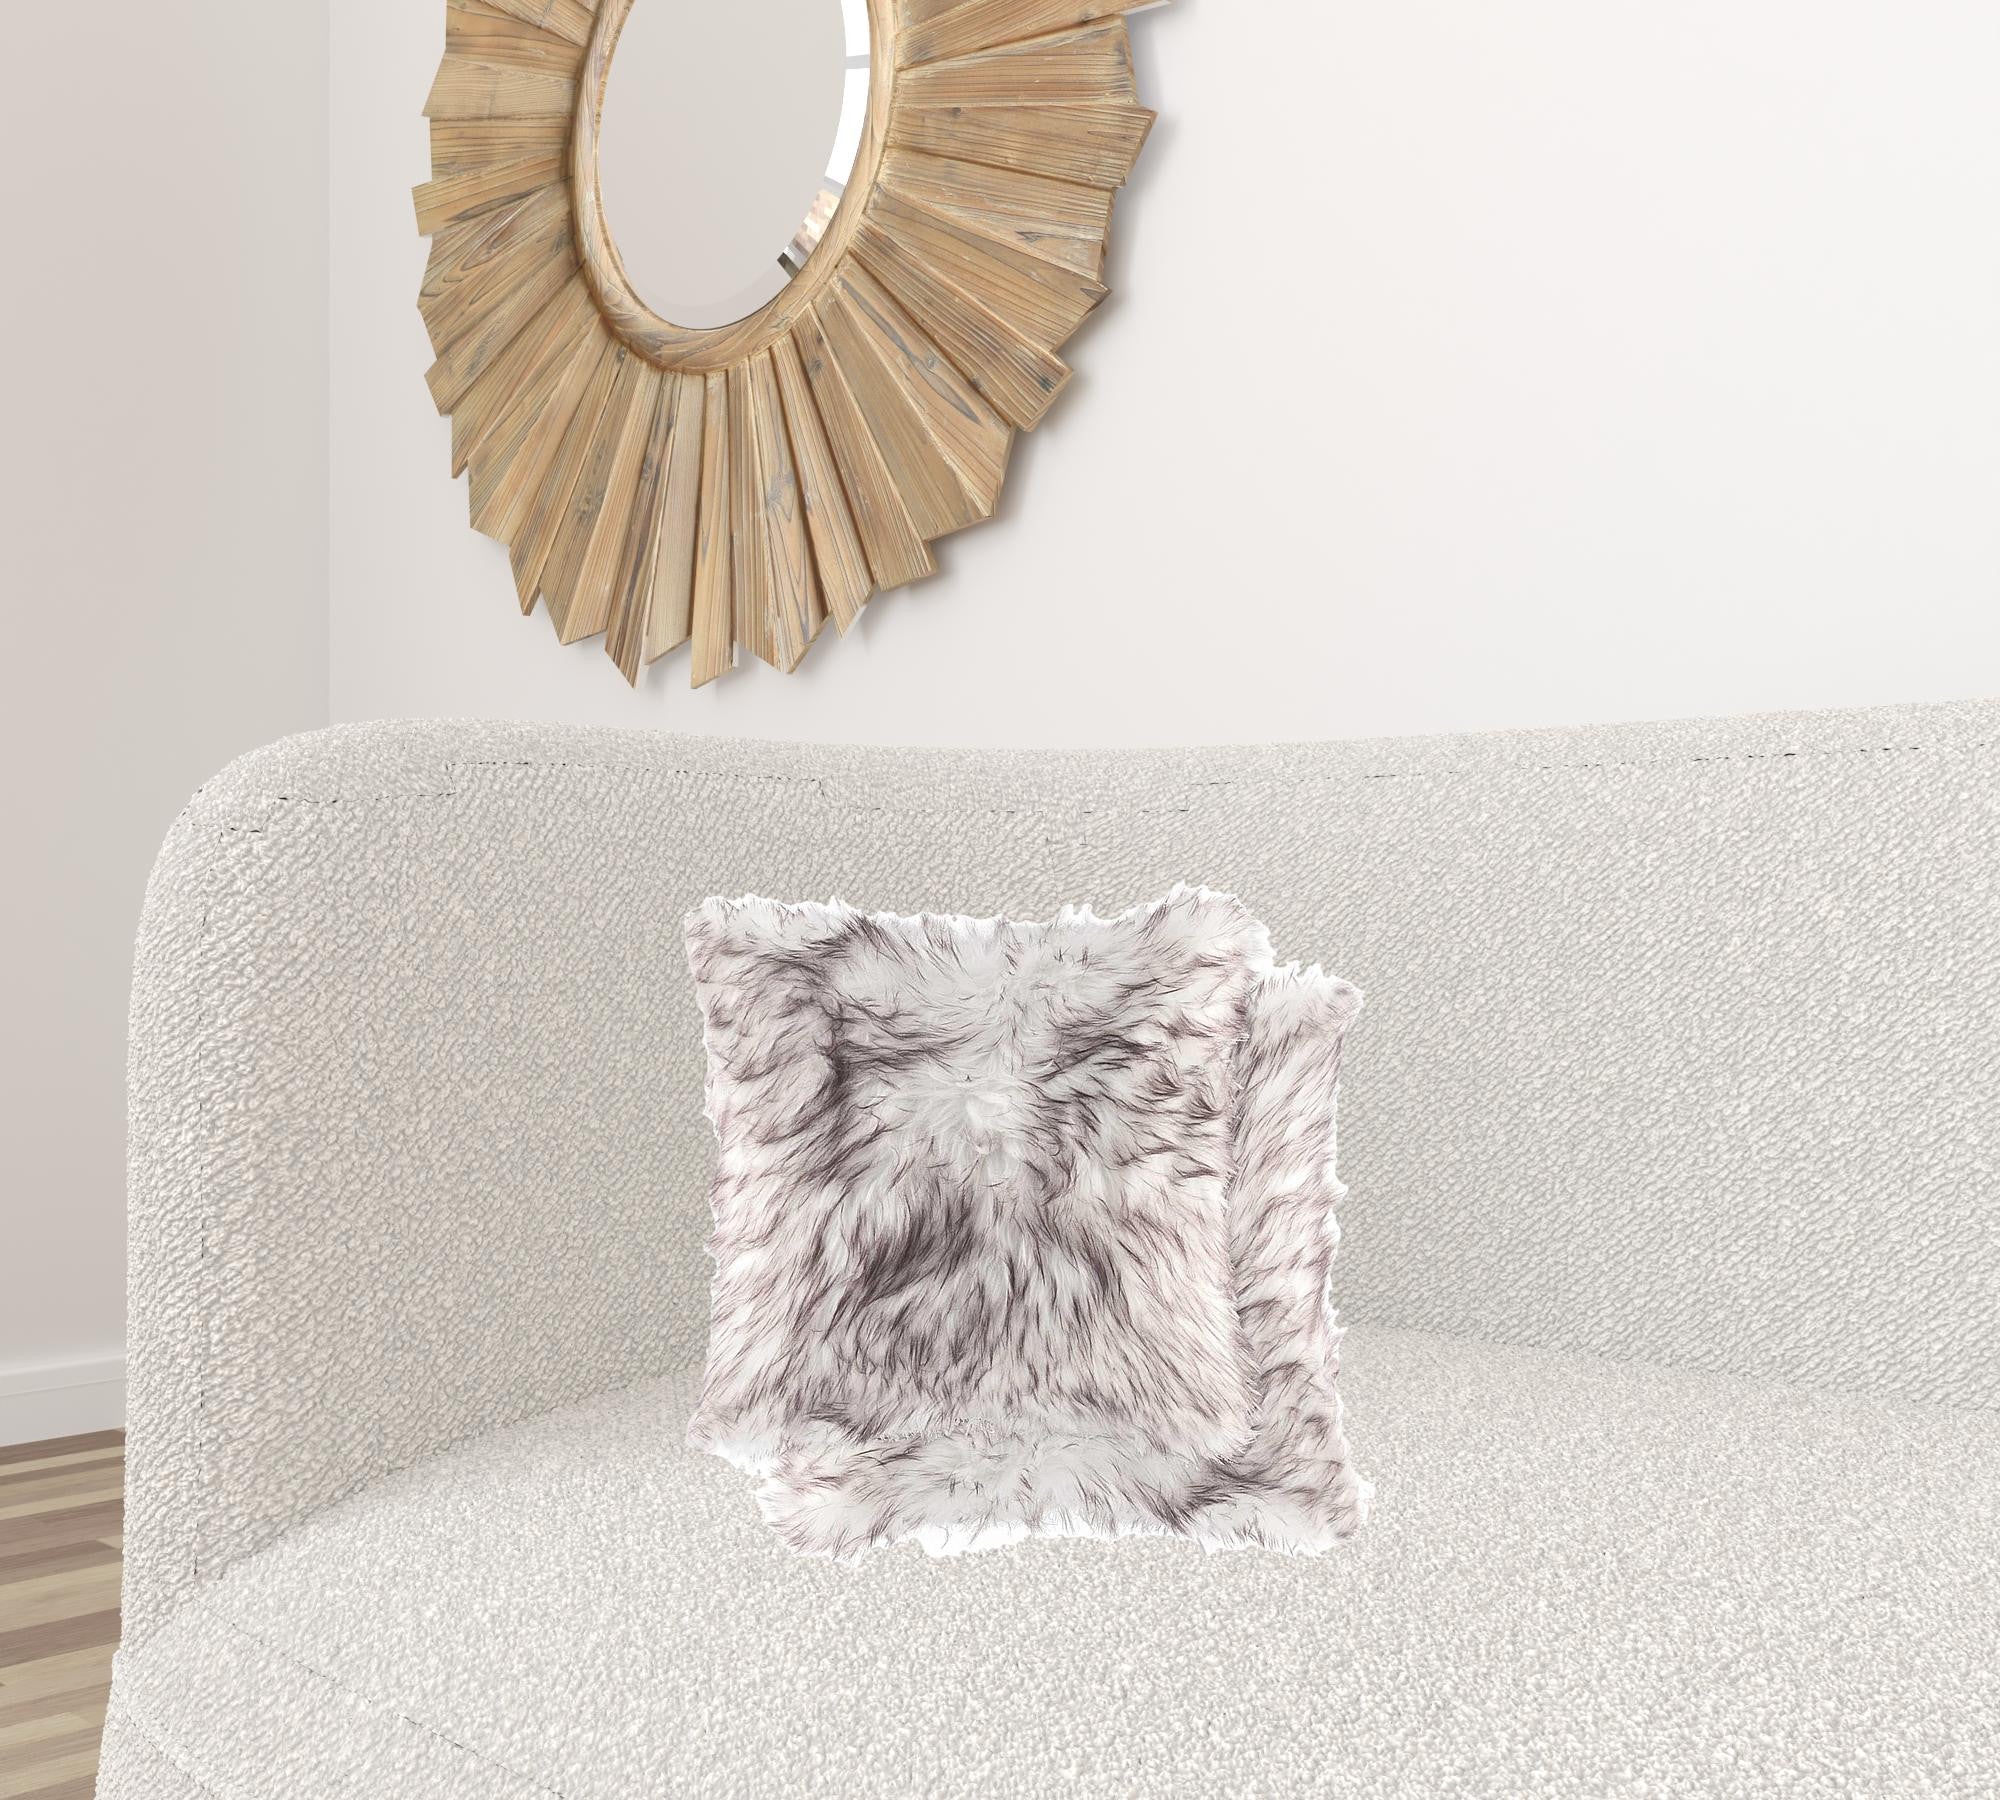 Set of Two 18" Chocolate Faux Fur Throw Pillow